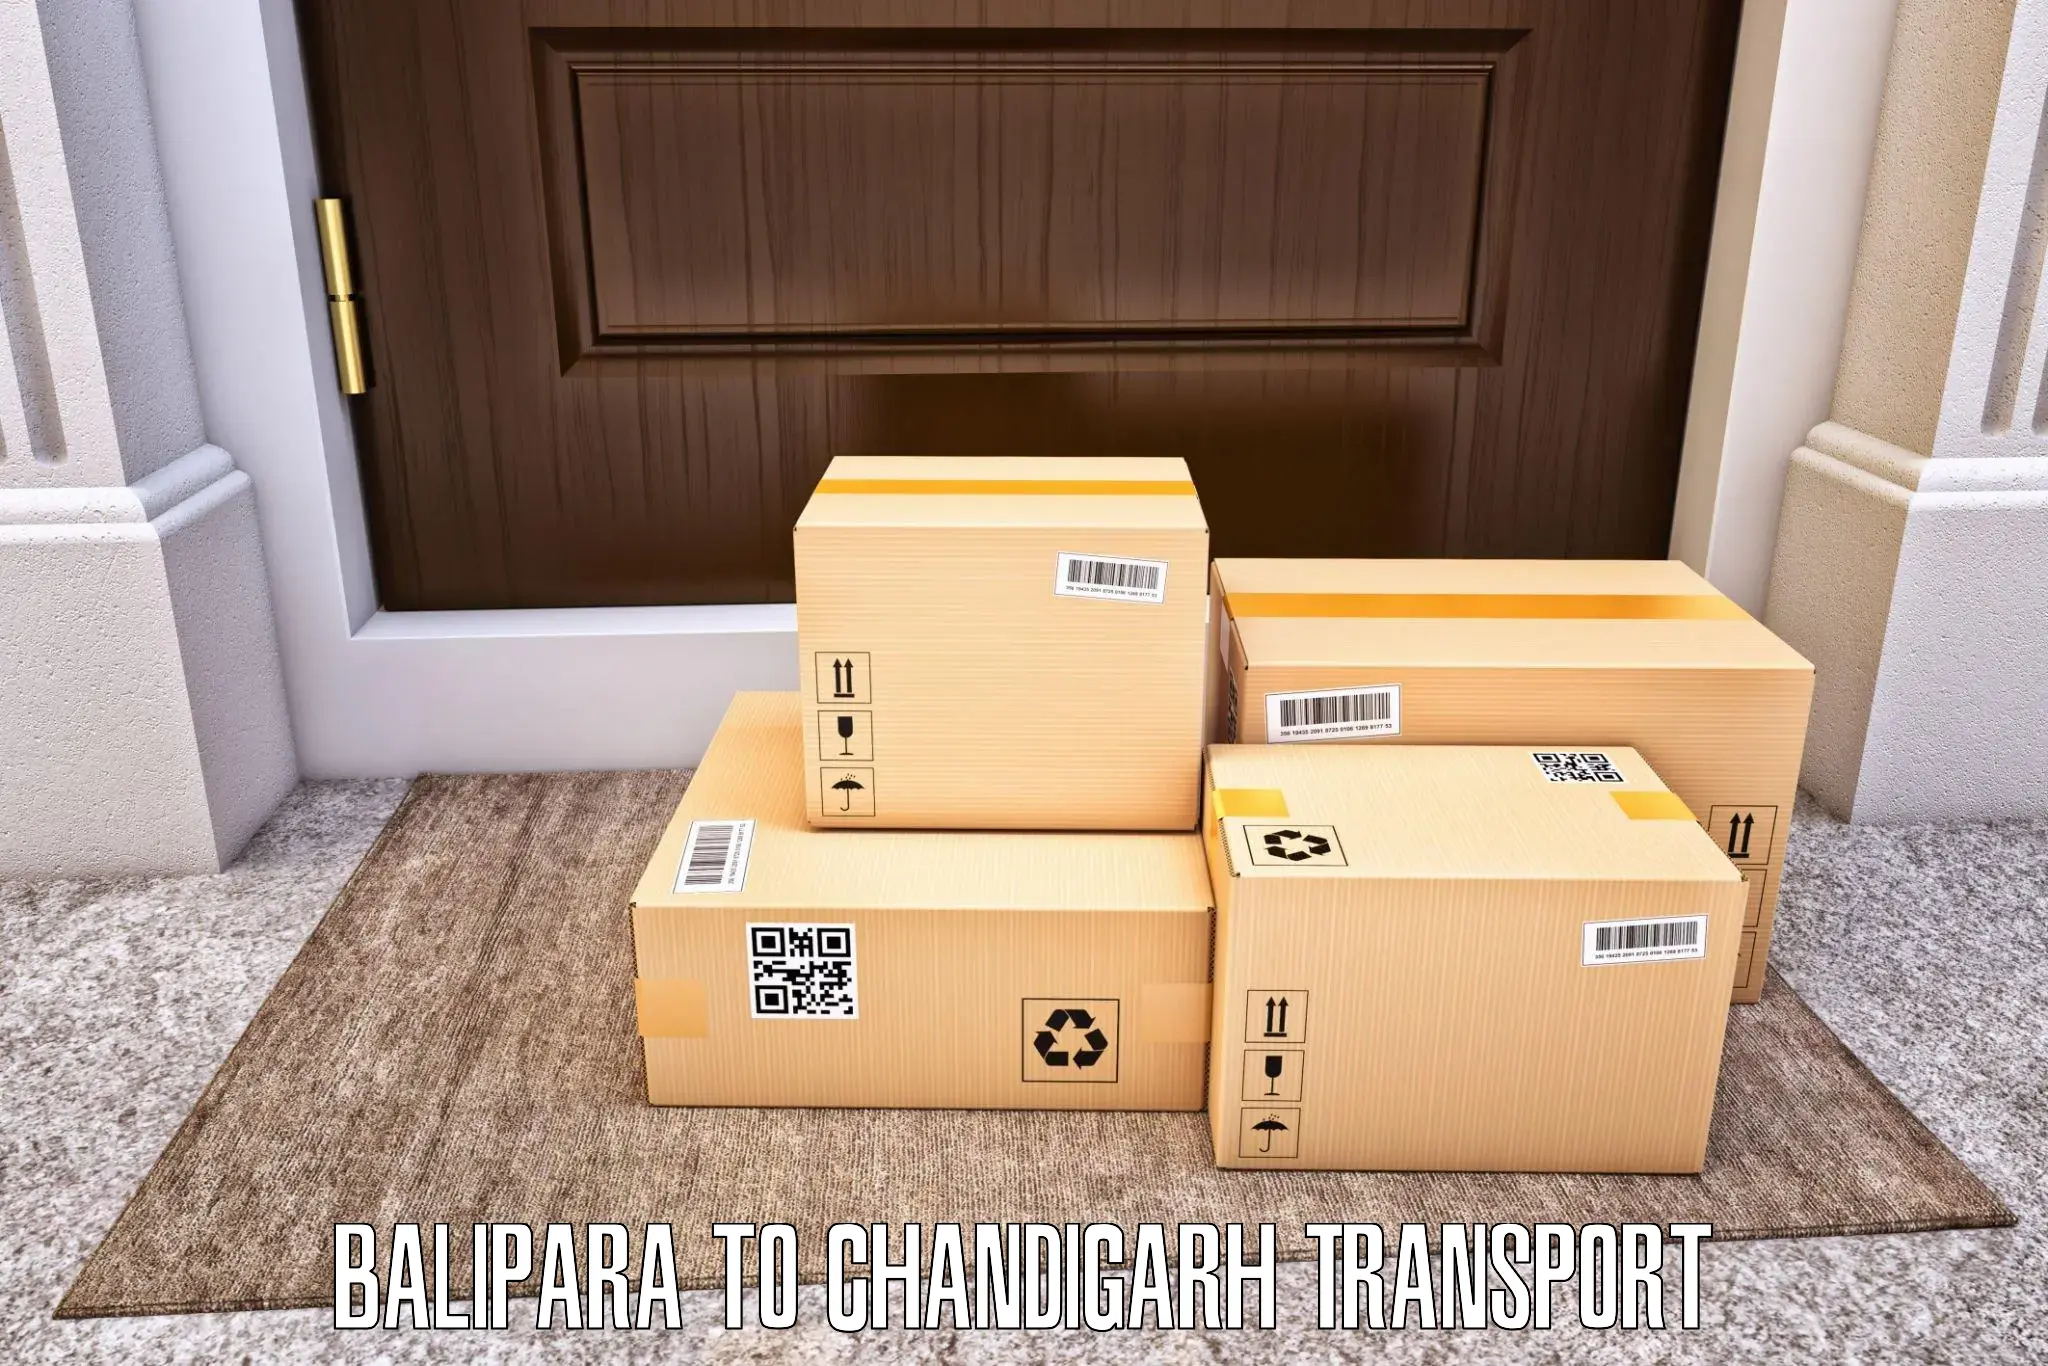 Part load transport service in India Balipara to Chandigarh